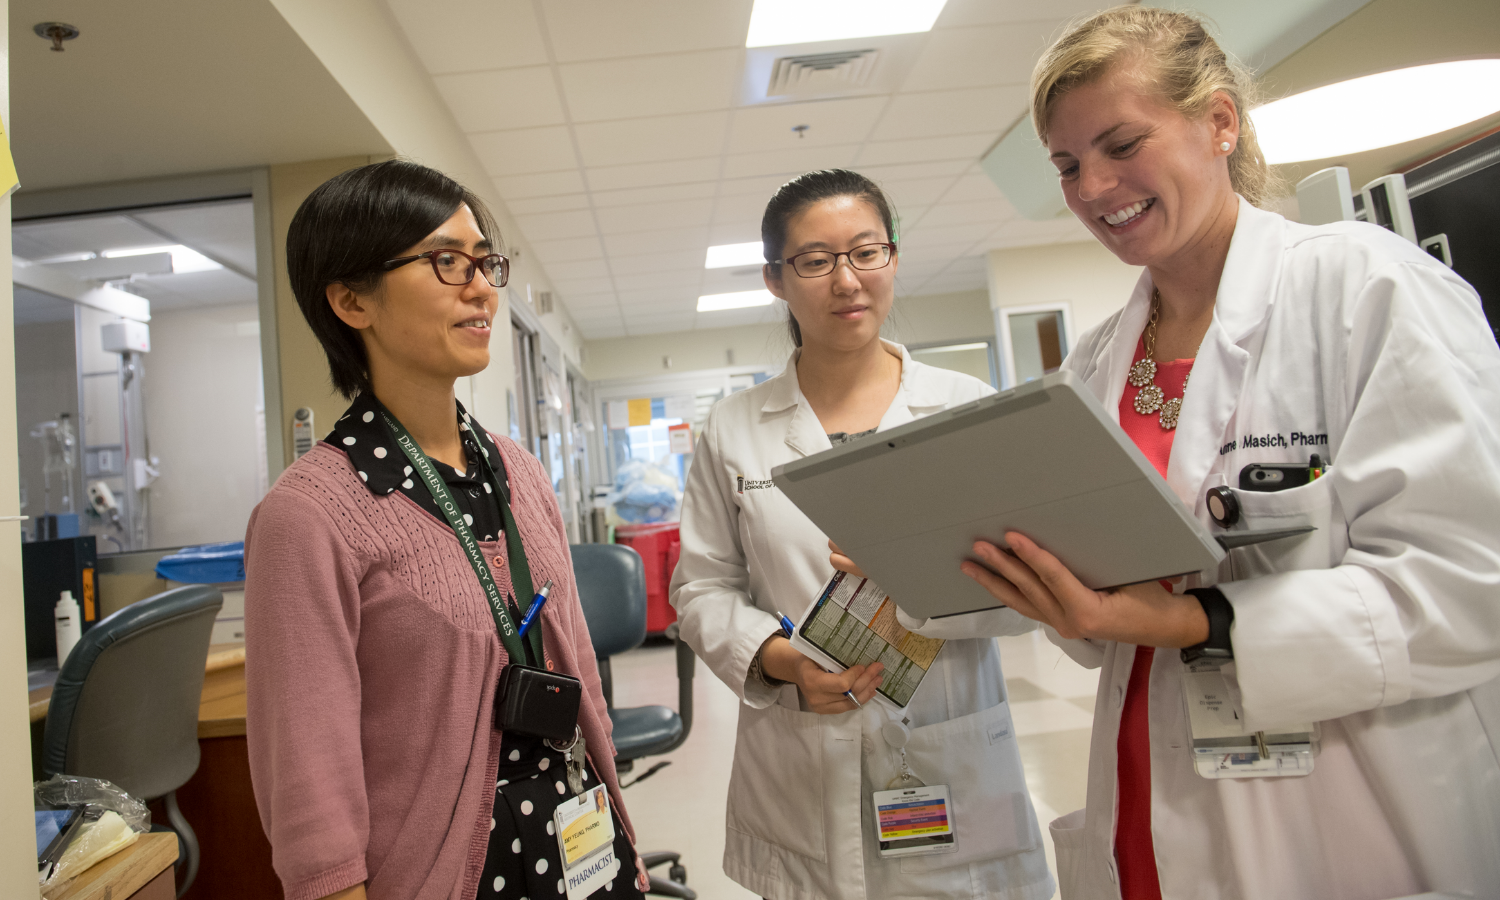 health care providers smiling while looking at a tablet and helping a patient